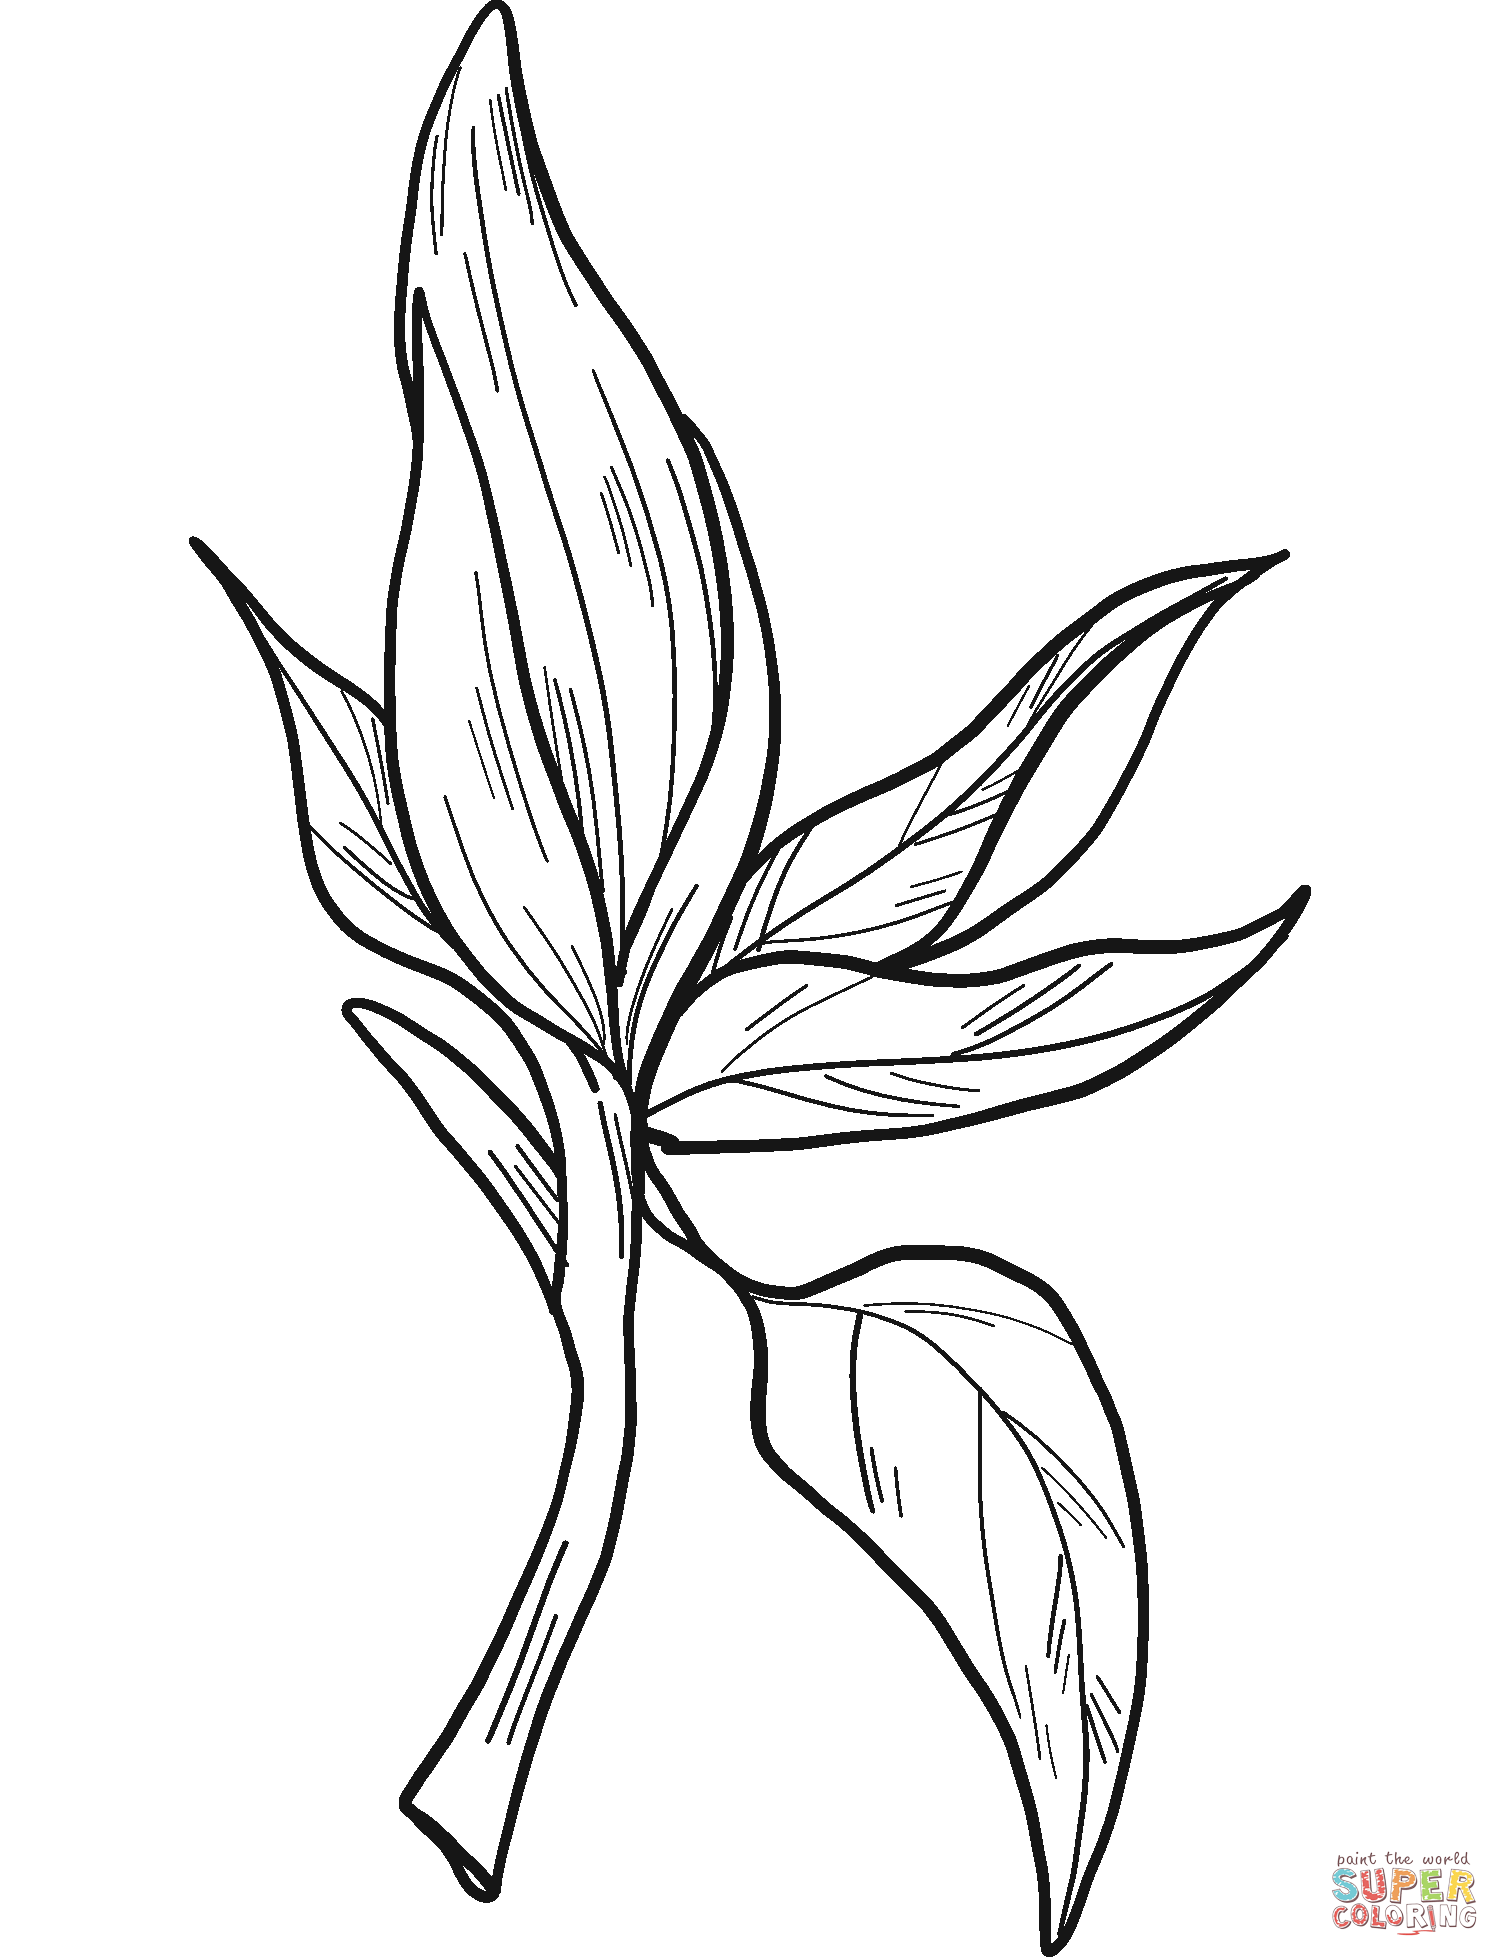 Magnolia Flower coloring page | Free Printable Coloring Pages